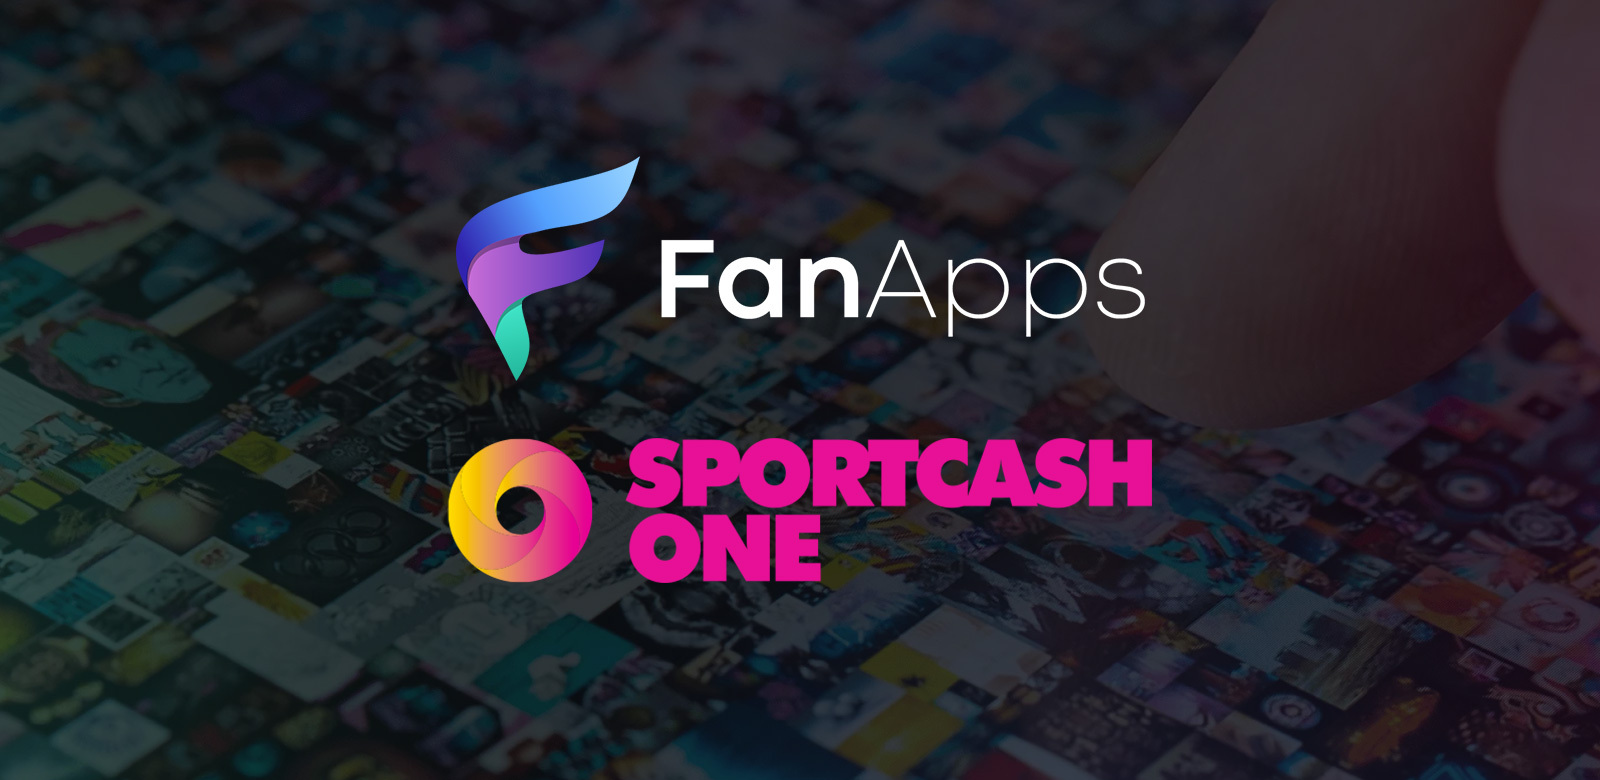 Image for Sportcash One Partners with FanApps post